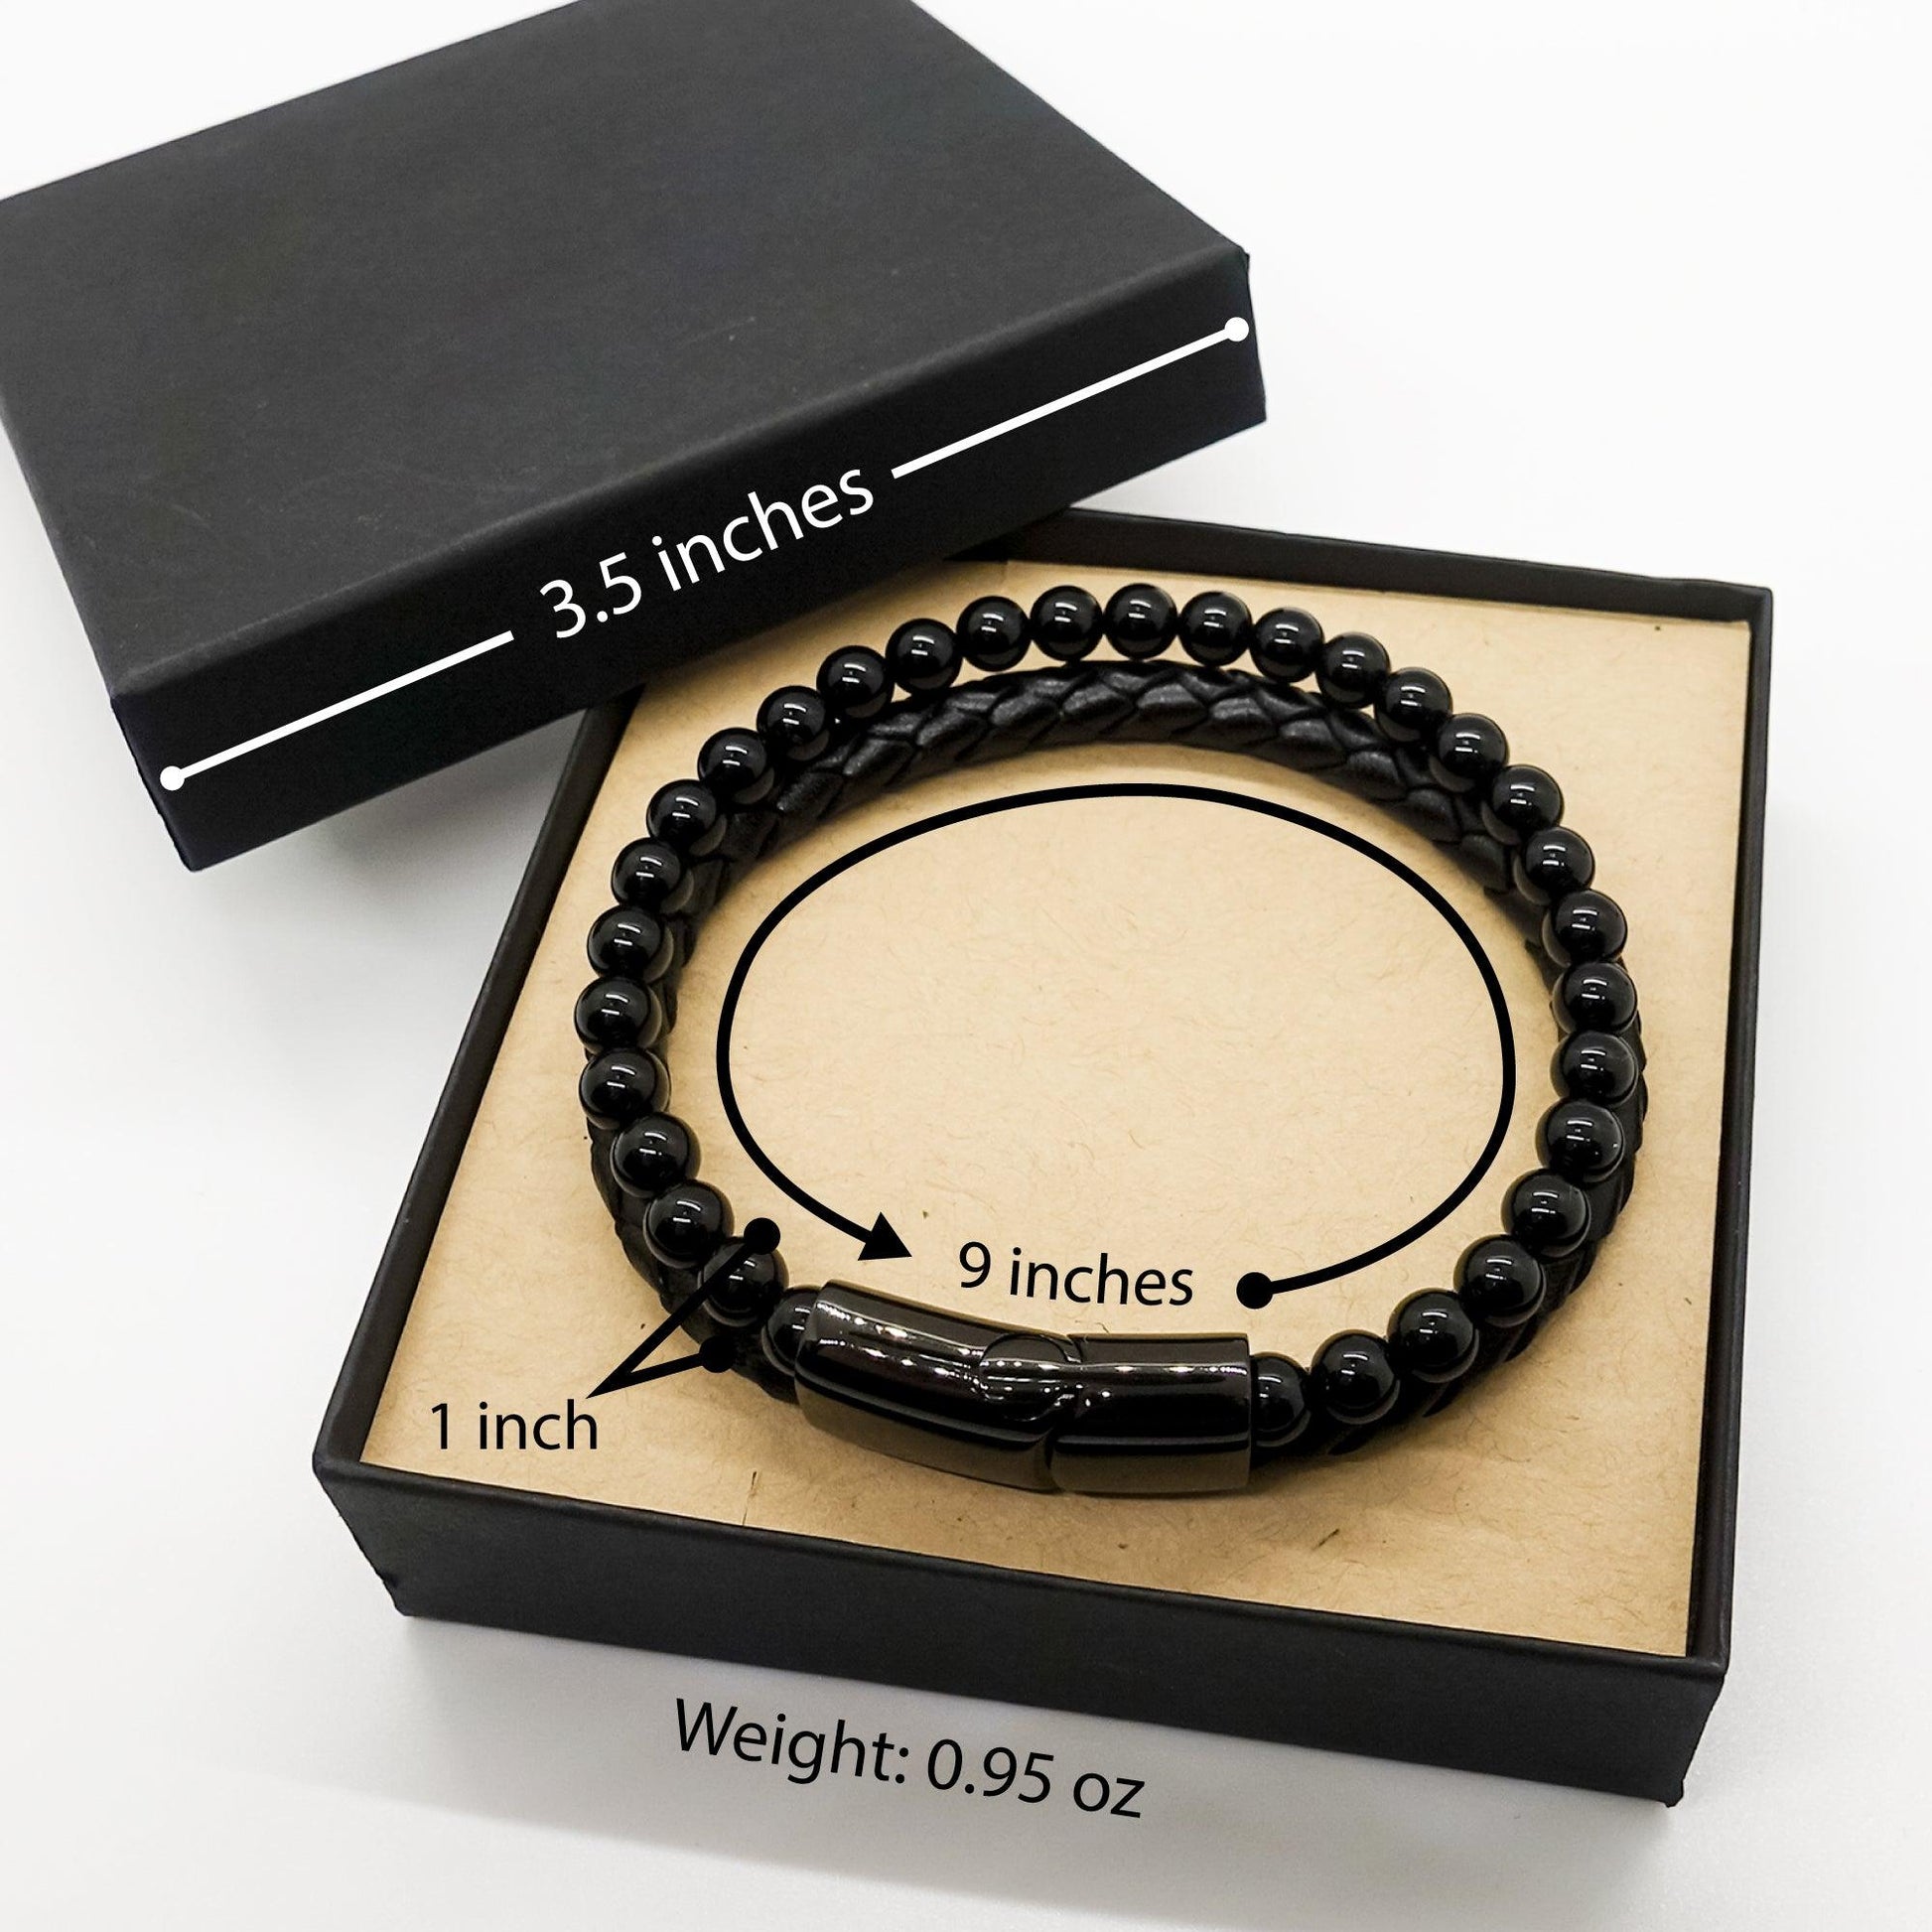 Remarkable Computer Programmer Gifts, Your dedication and hard work, Inspirational Birthday Christmas Unique Stone Leather Bracelets For Computer Programmer, Coworkers, Men, Women, Friends - Mallard Moon Gift Shop